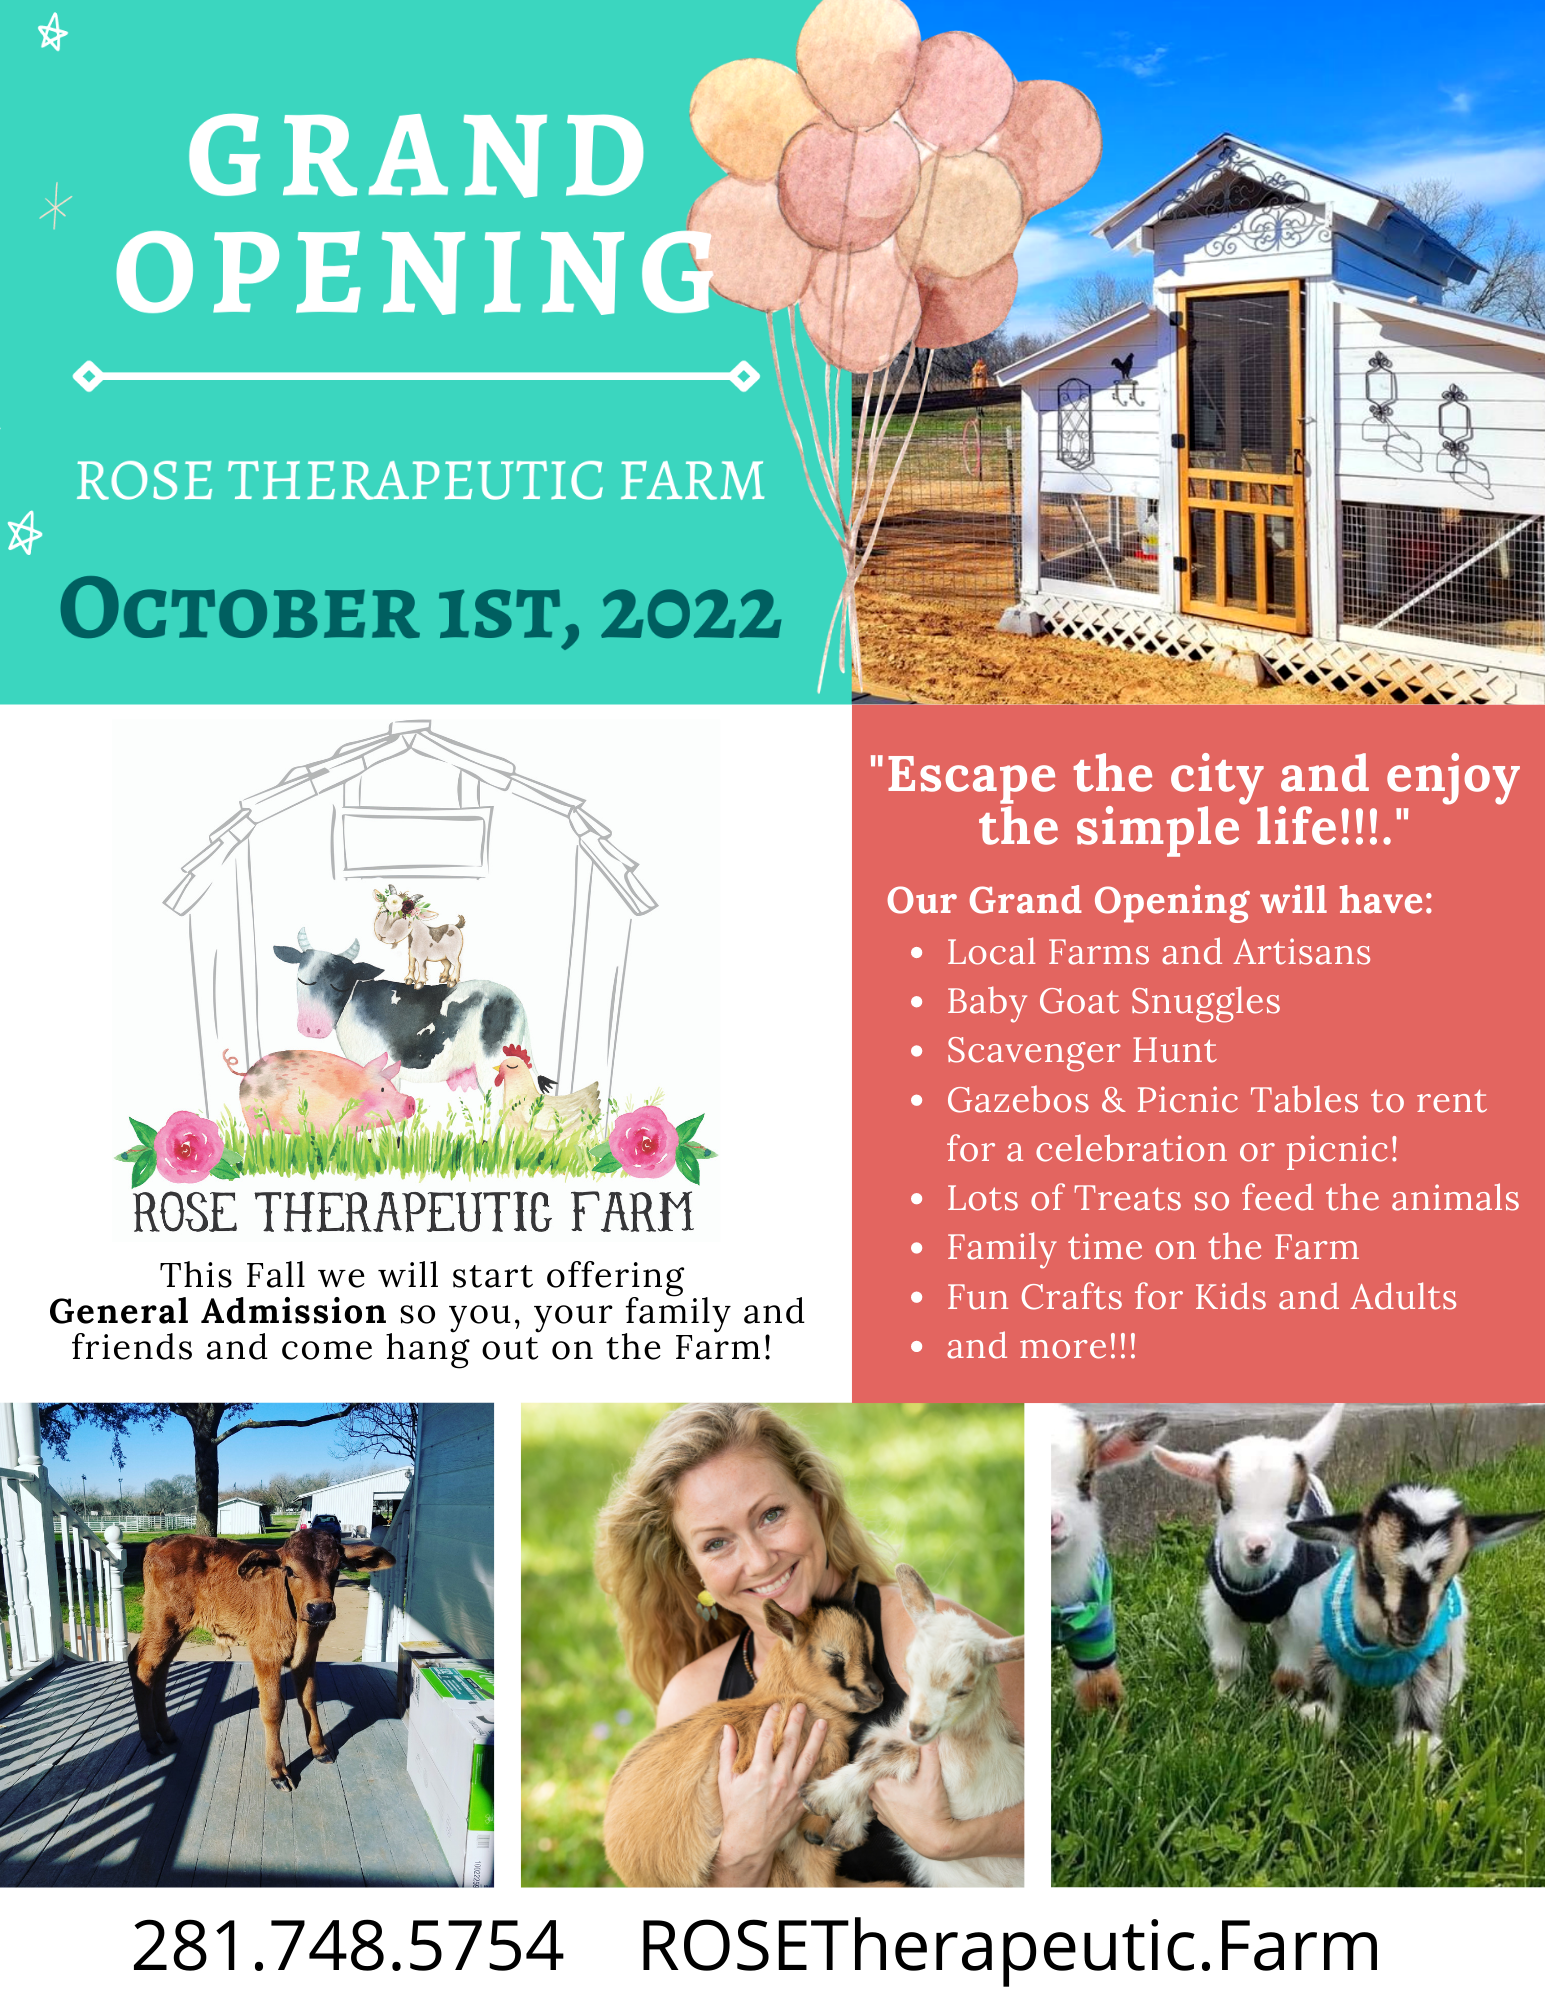 Grand Opening at ROSE Therapeutic FArm